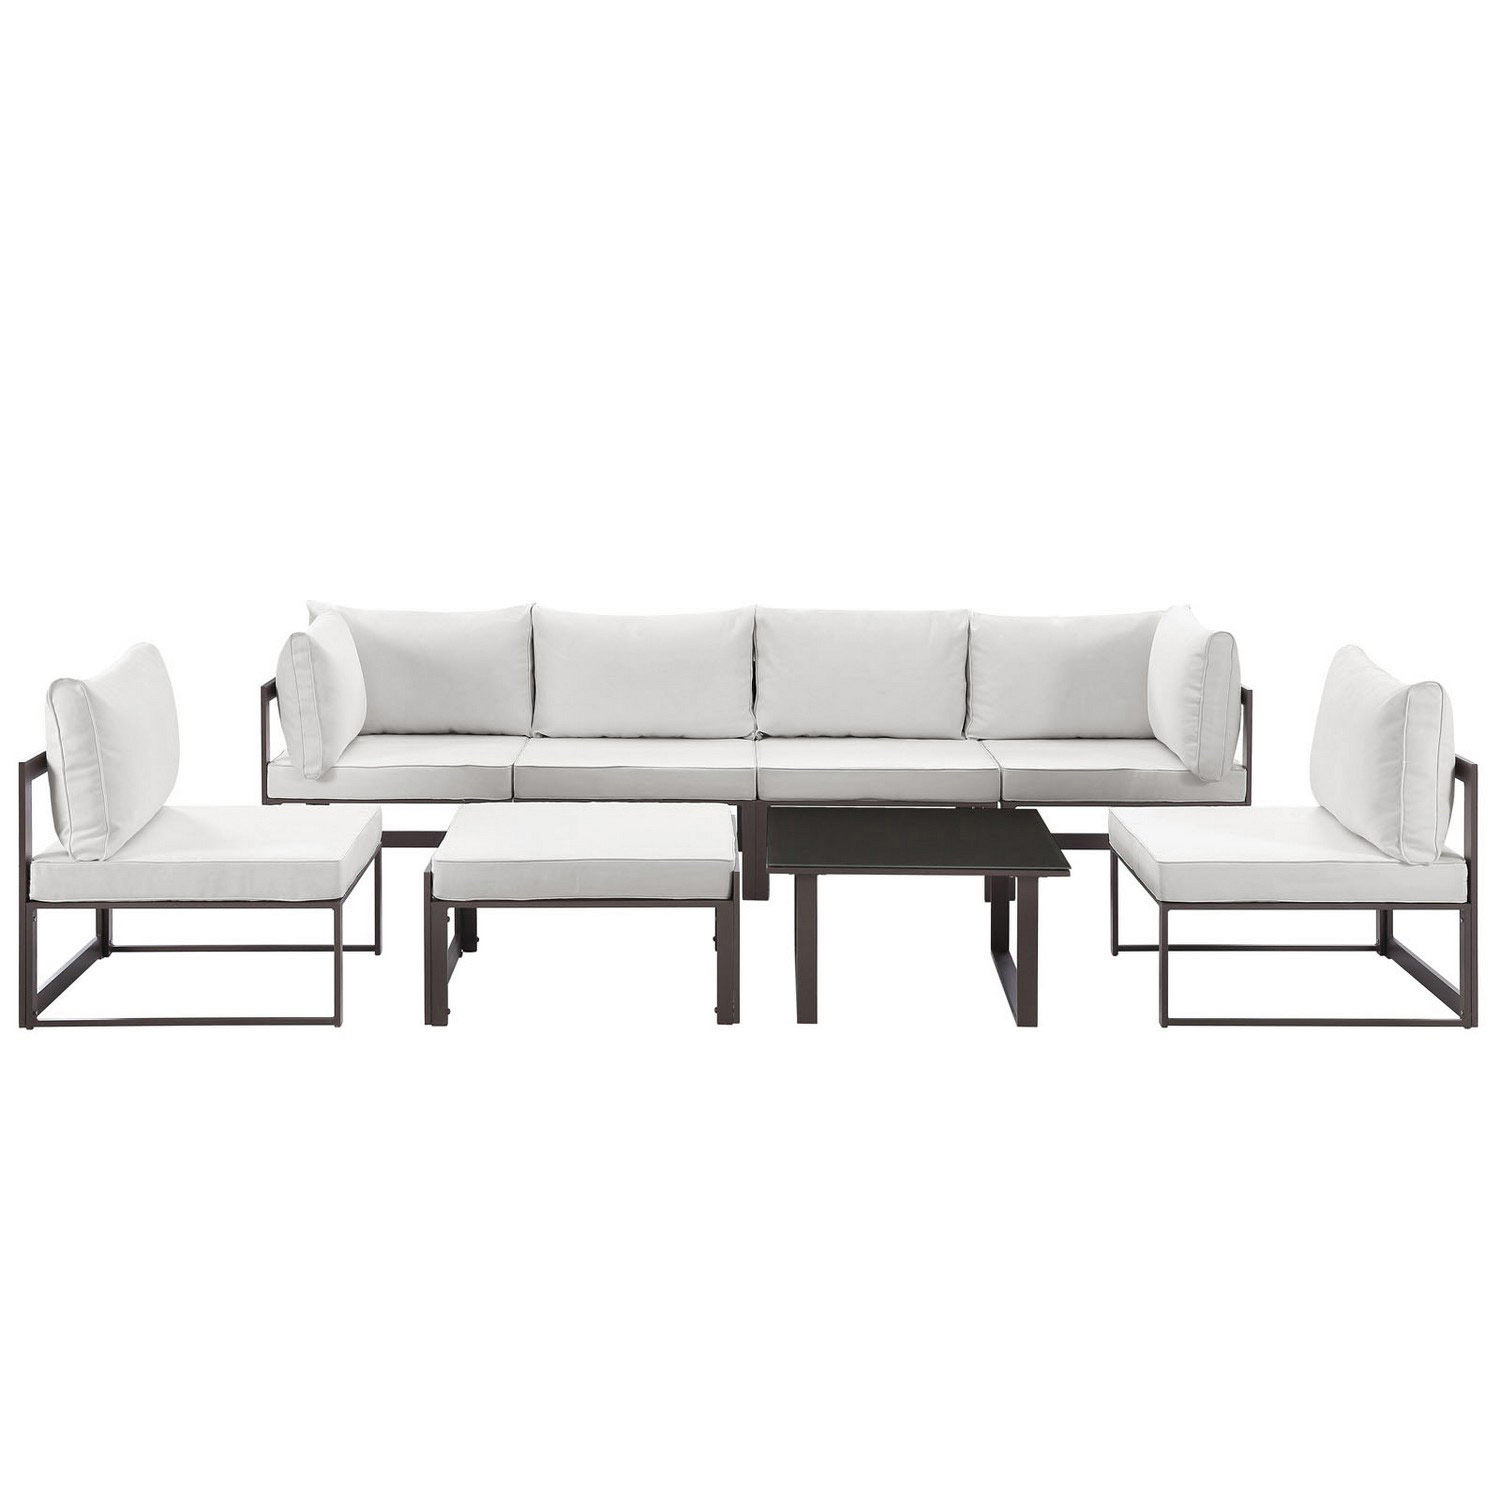 Modway Fortuna 8 Piece Outdoor Patio Sectional Sofa Set - Brown/White